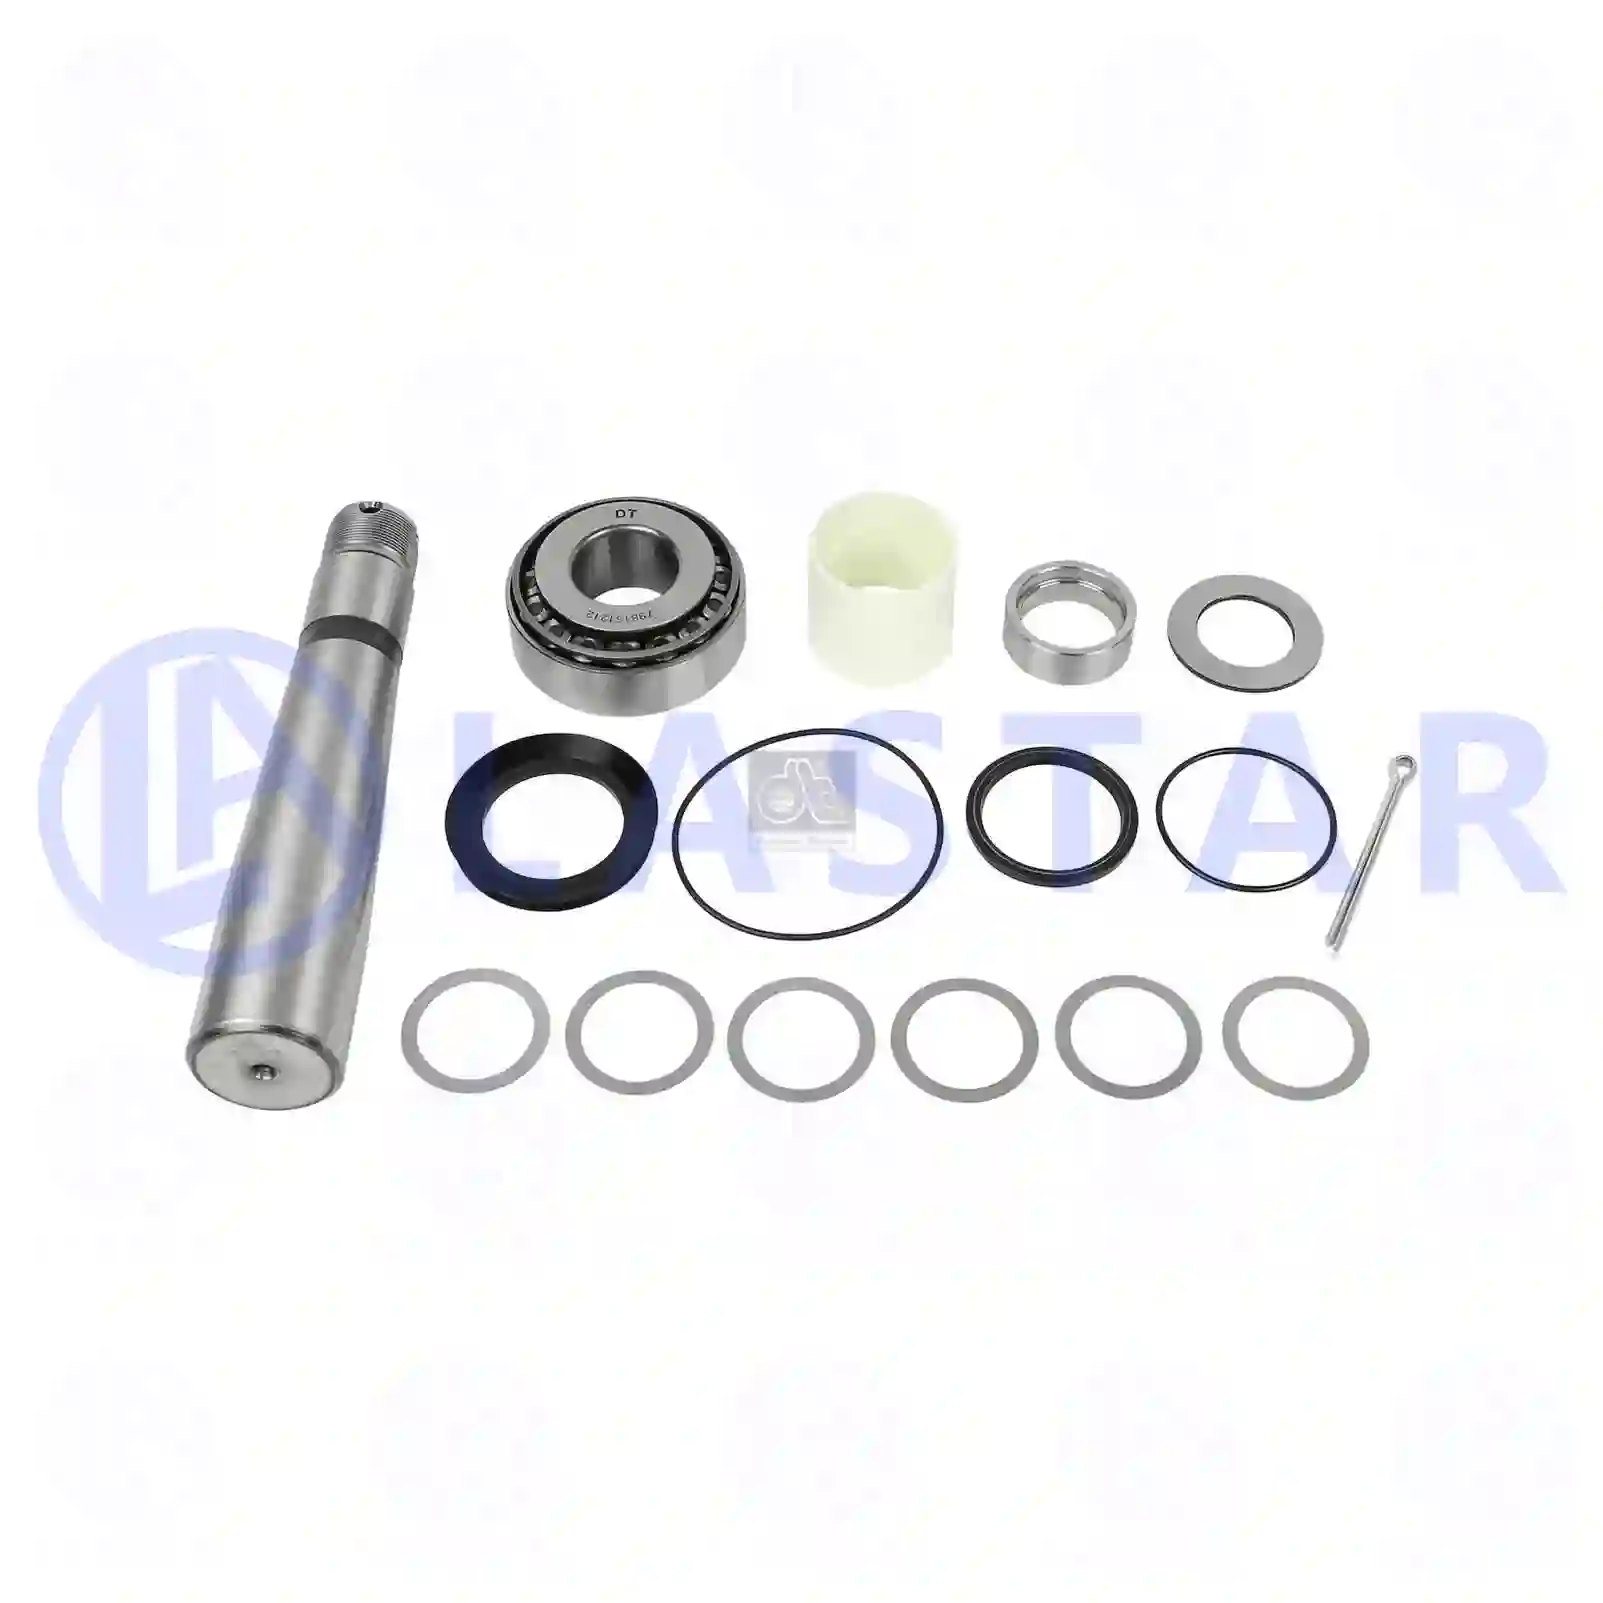 King pin kit, with bearing, 77731422, 3090266S, ZG41295-0008, , ||  77731422 Lastar Spare Part | Truck Spare Parts, Auotomotive Spare Parts King pin kit, with bearing, 77731422, 3090266S, ZG41295-0008, , ||  77731422 Lastar Spare Part | Truck Spare Parts, Auotomotive Spare Parts